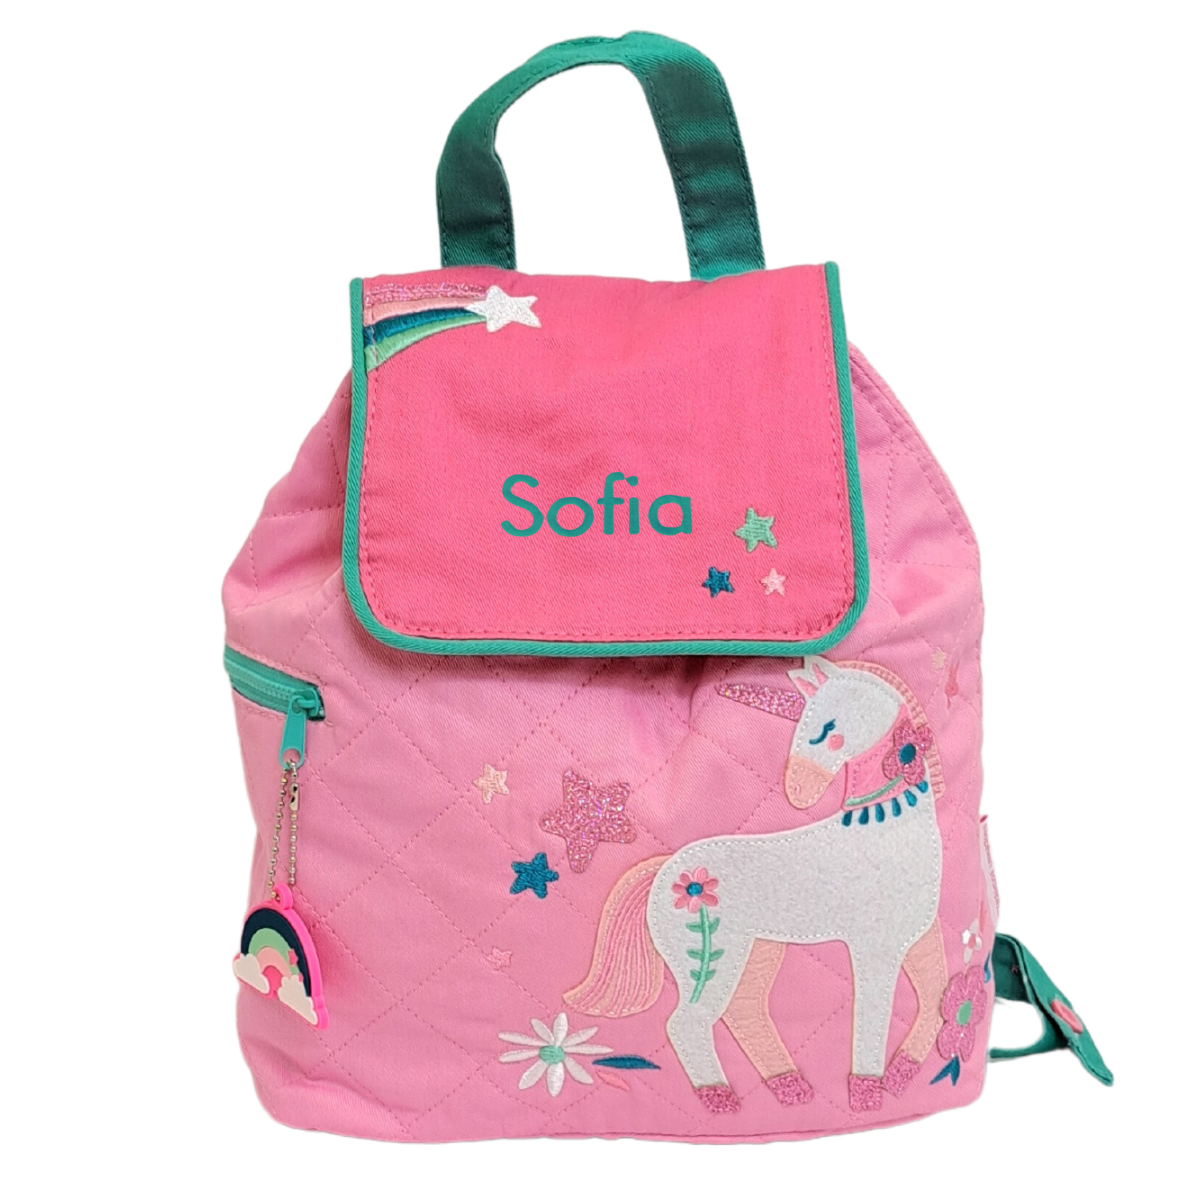 Image of a Stephen Joseph quilted bag for children. The main body of the bag is a fondant pink colour with an appliqued uniforn on the front with glittery feet and a glittery horn. The flap of the bag is a darker pink and it can be embroidered with a name of your choice of up to 10 characters.